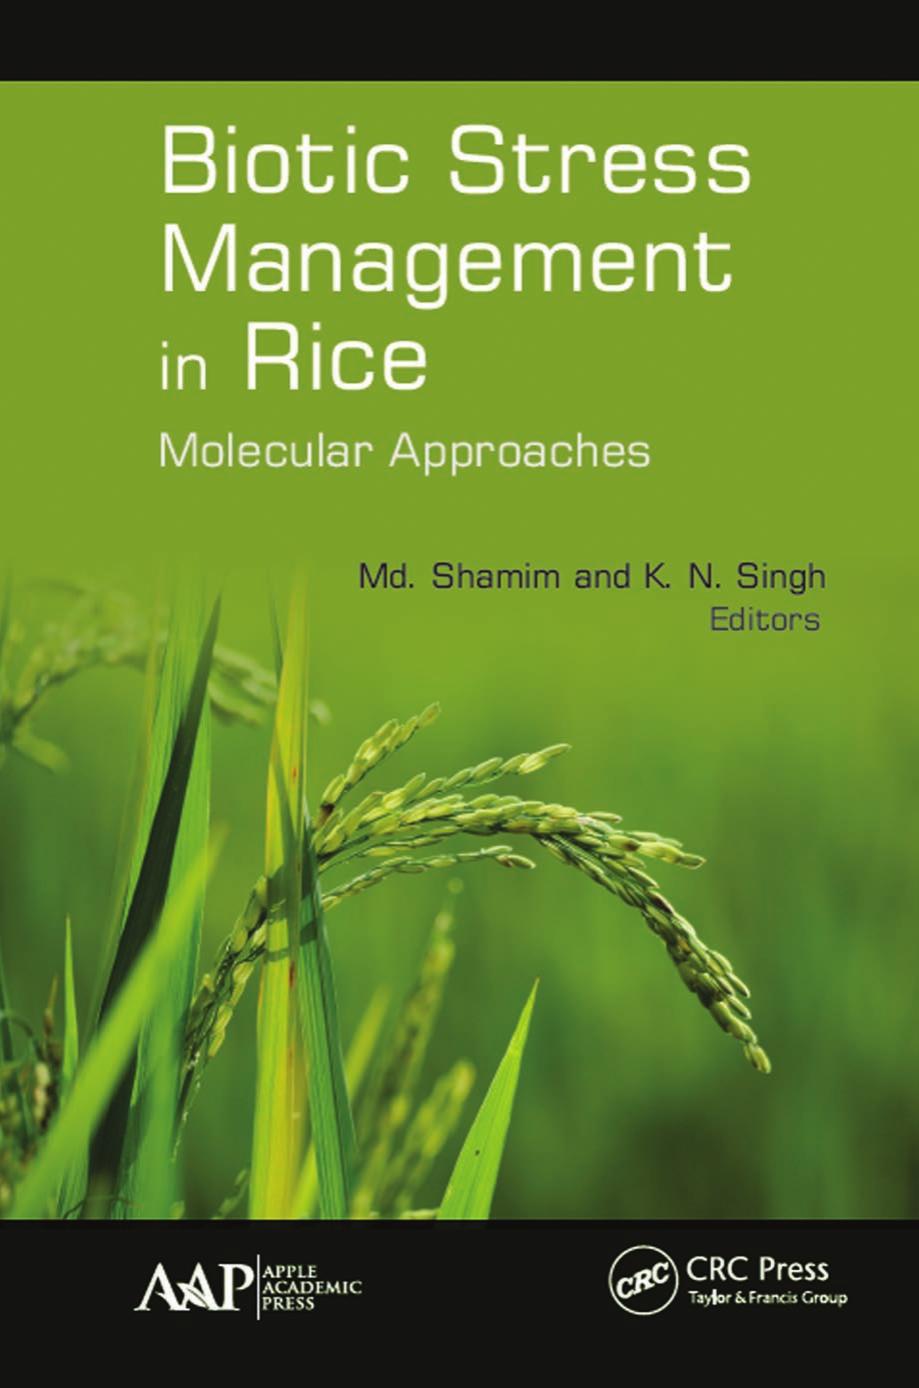 BIOTIC STRESS MANAGEMENT IN RICE: Molecular Approaches